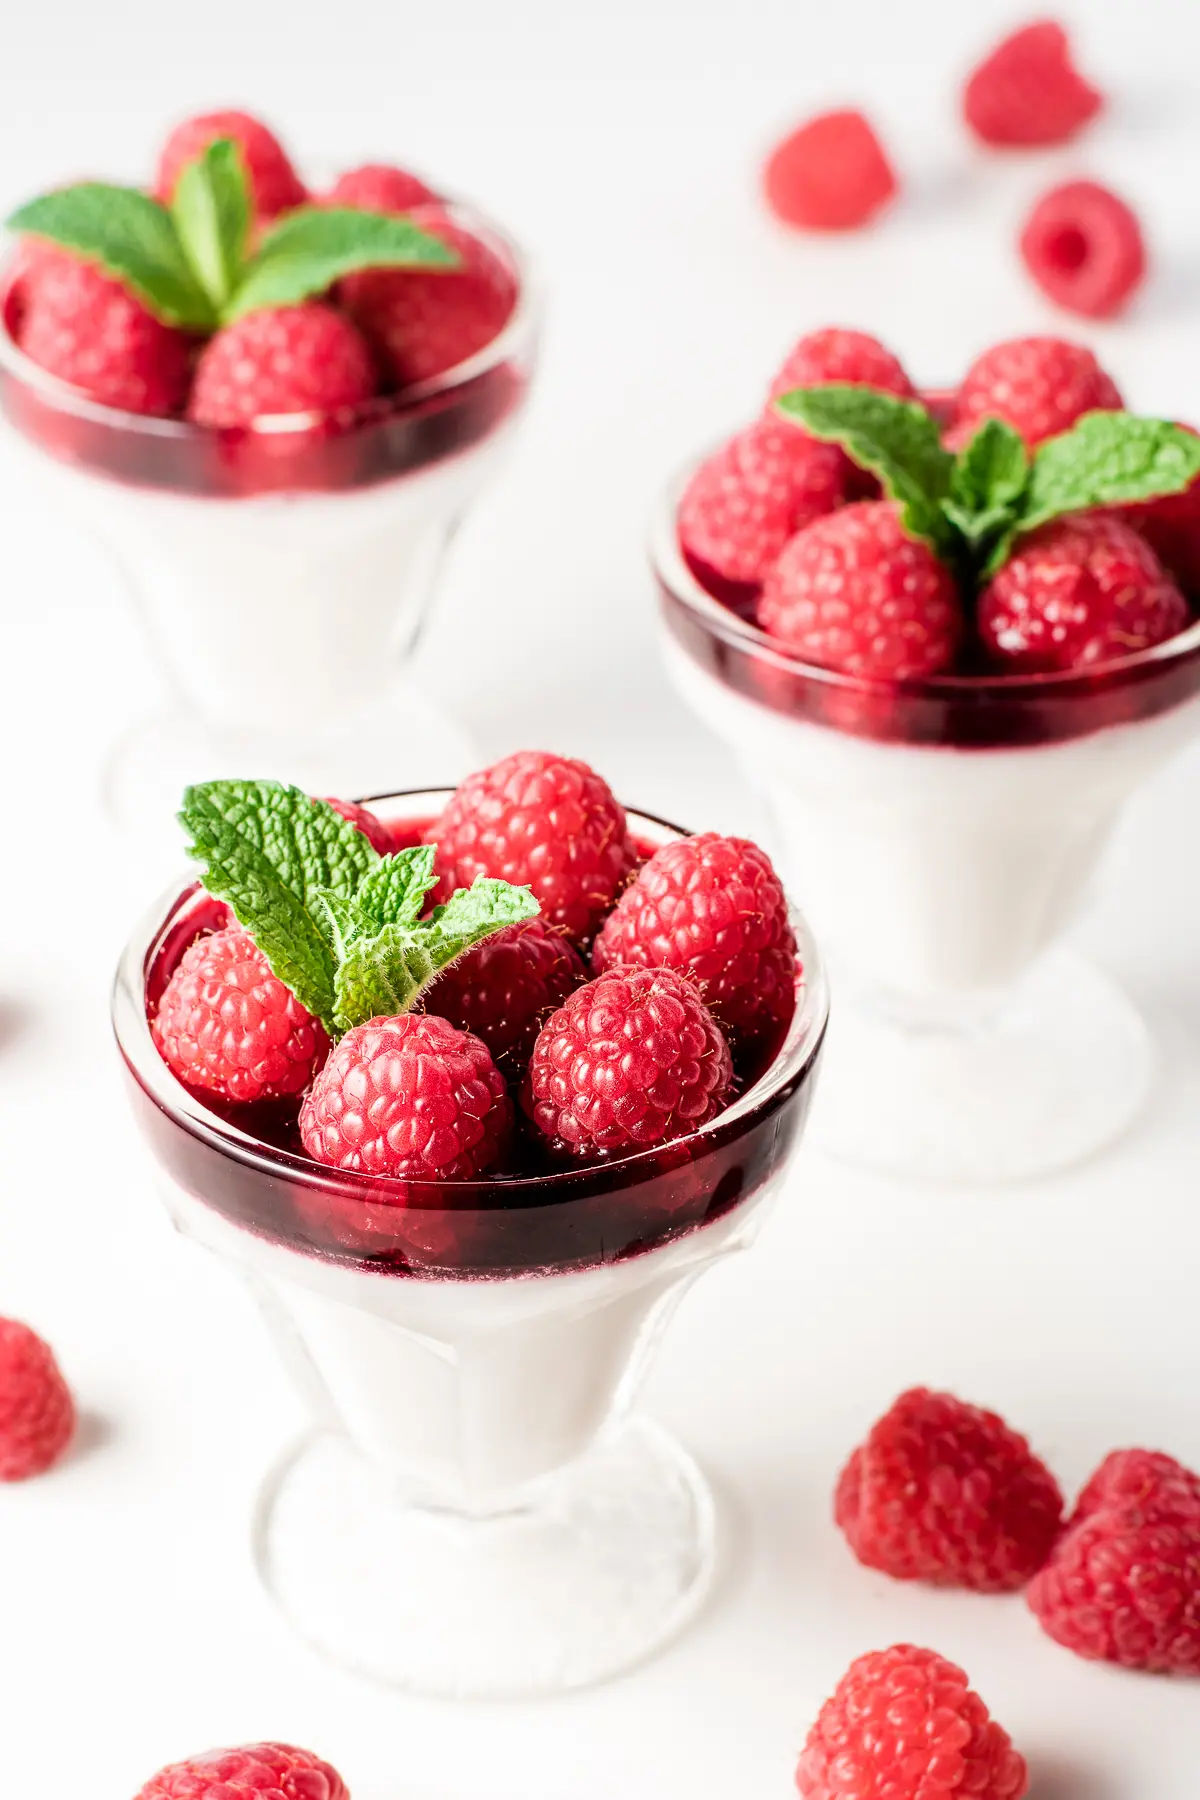 Small sundae dishes with coconut milk raspberry panna cotta topped with red, ripe raspberries and sprigs of mint. There are a few scattered raspberries on the white backdrop.